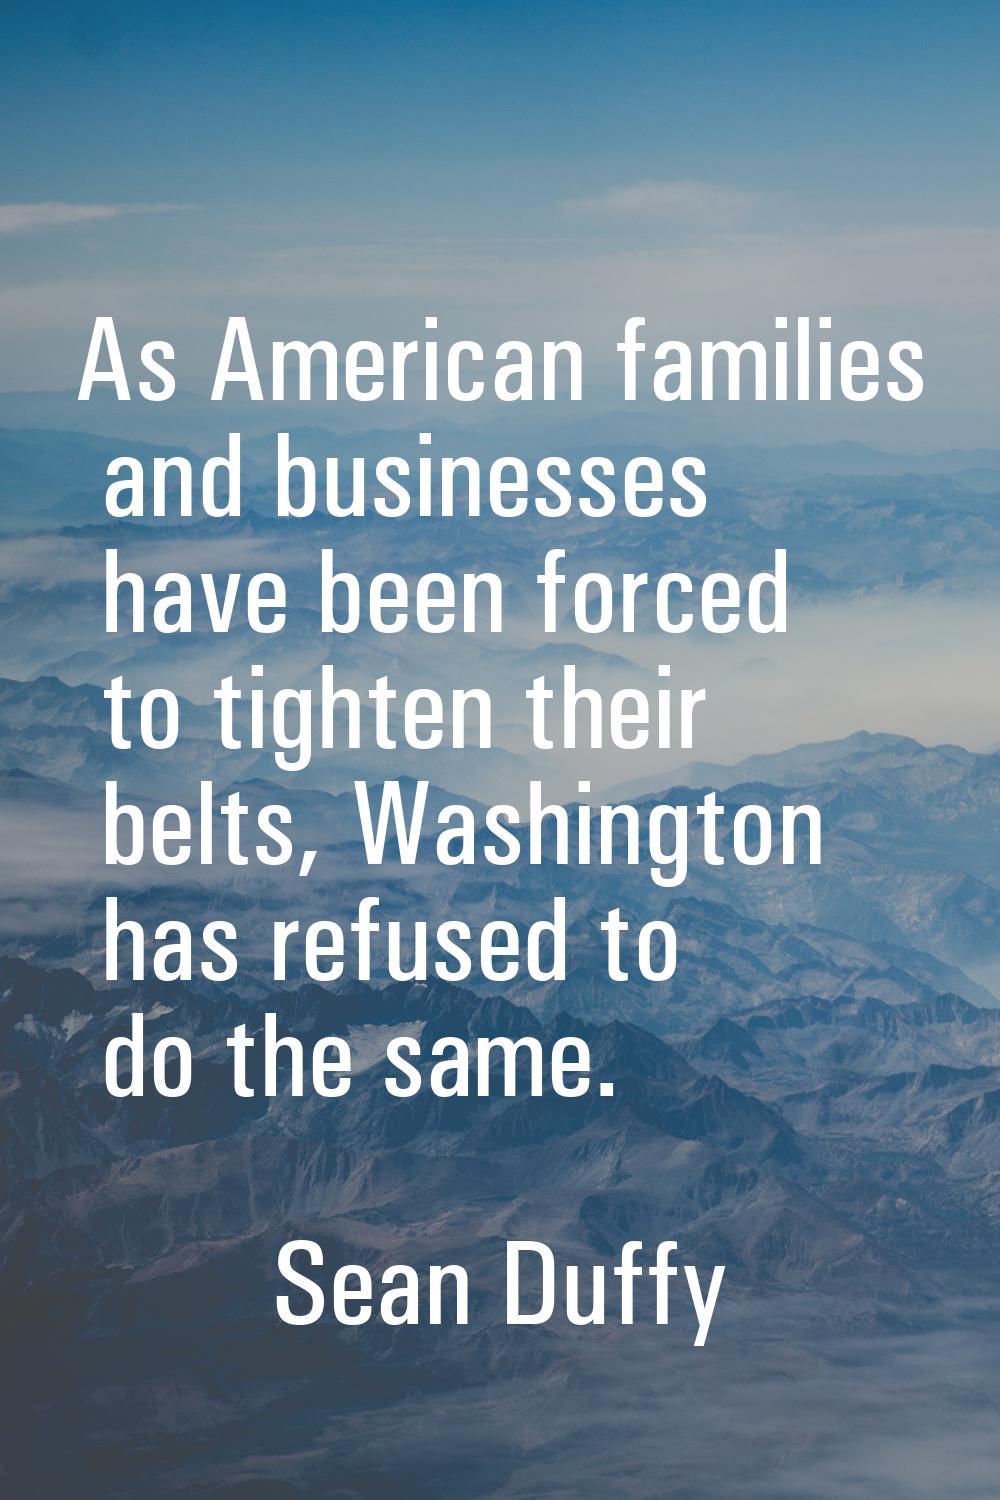 As American families and businesses have been forced to tighten their belts, Washington has refused